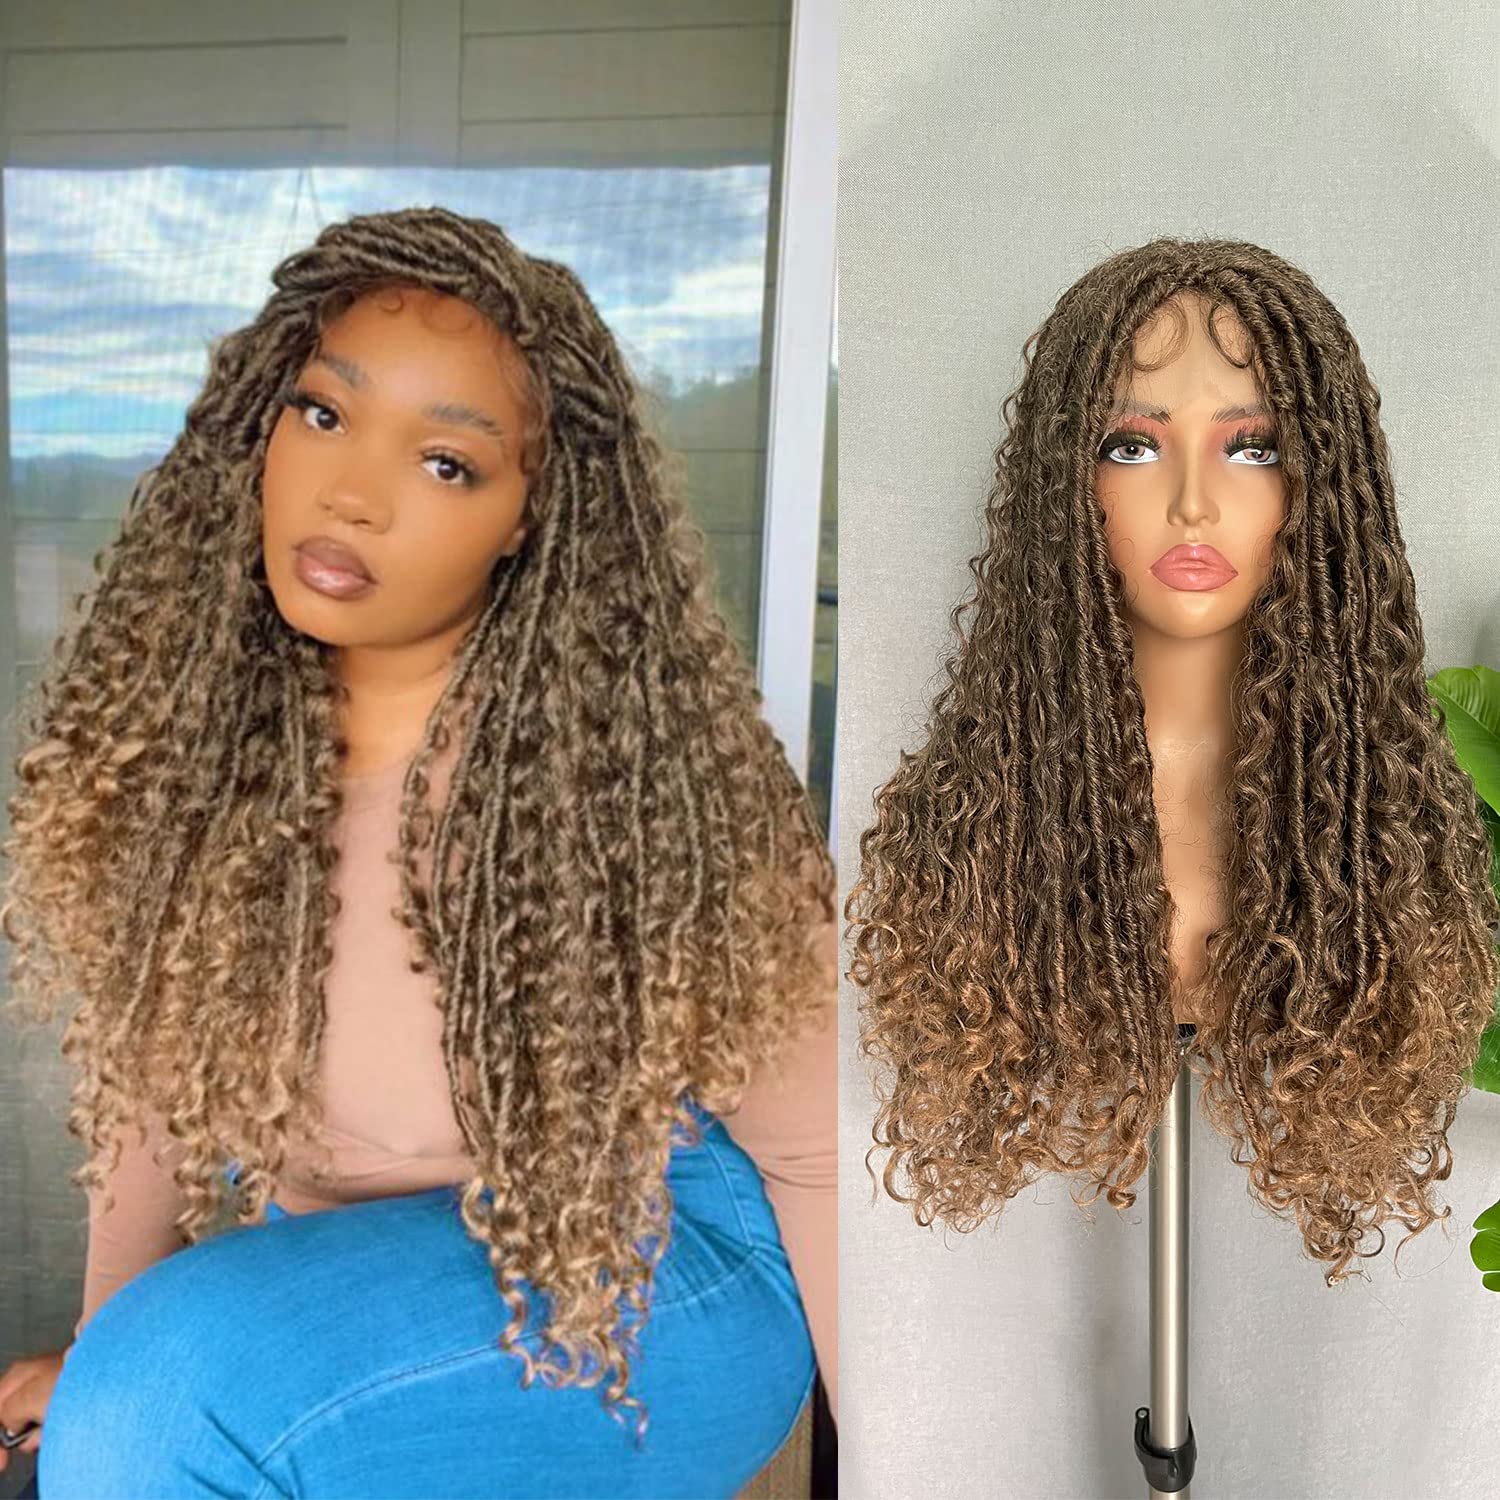 SOKU Lace Front Faux Locs Braided Wig 28 Swiss Lace Ombre Brown Mixed  Bohemian Curly Hair